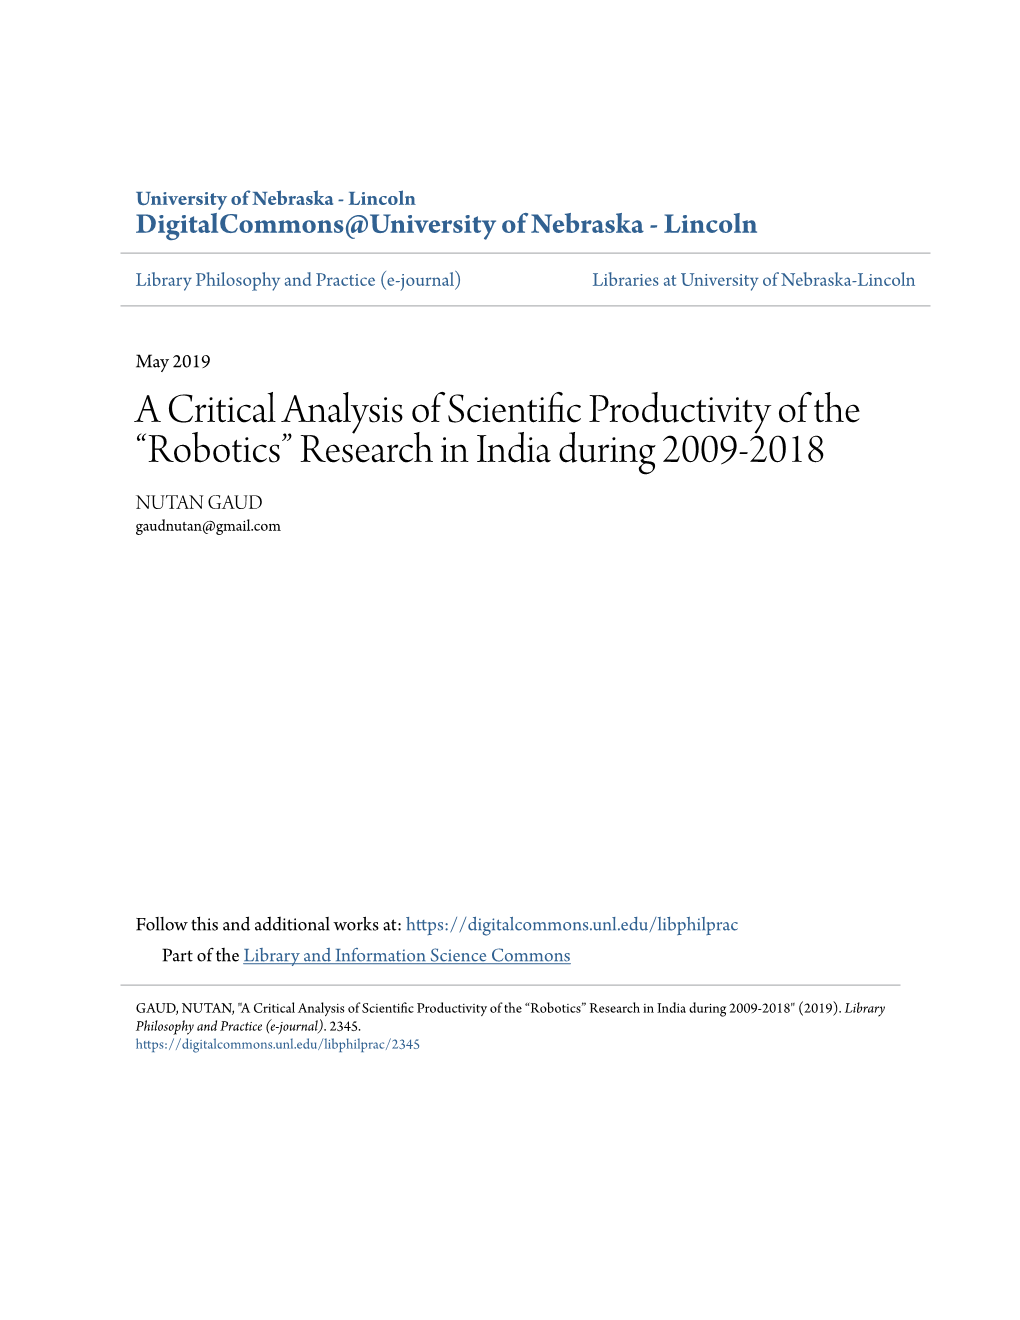 A Critical Analysis of Scientific Productivity of the “Robotics